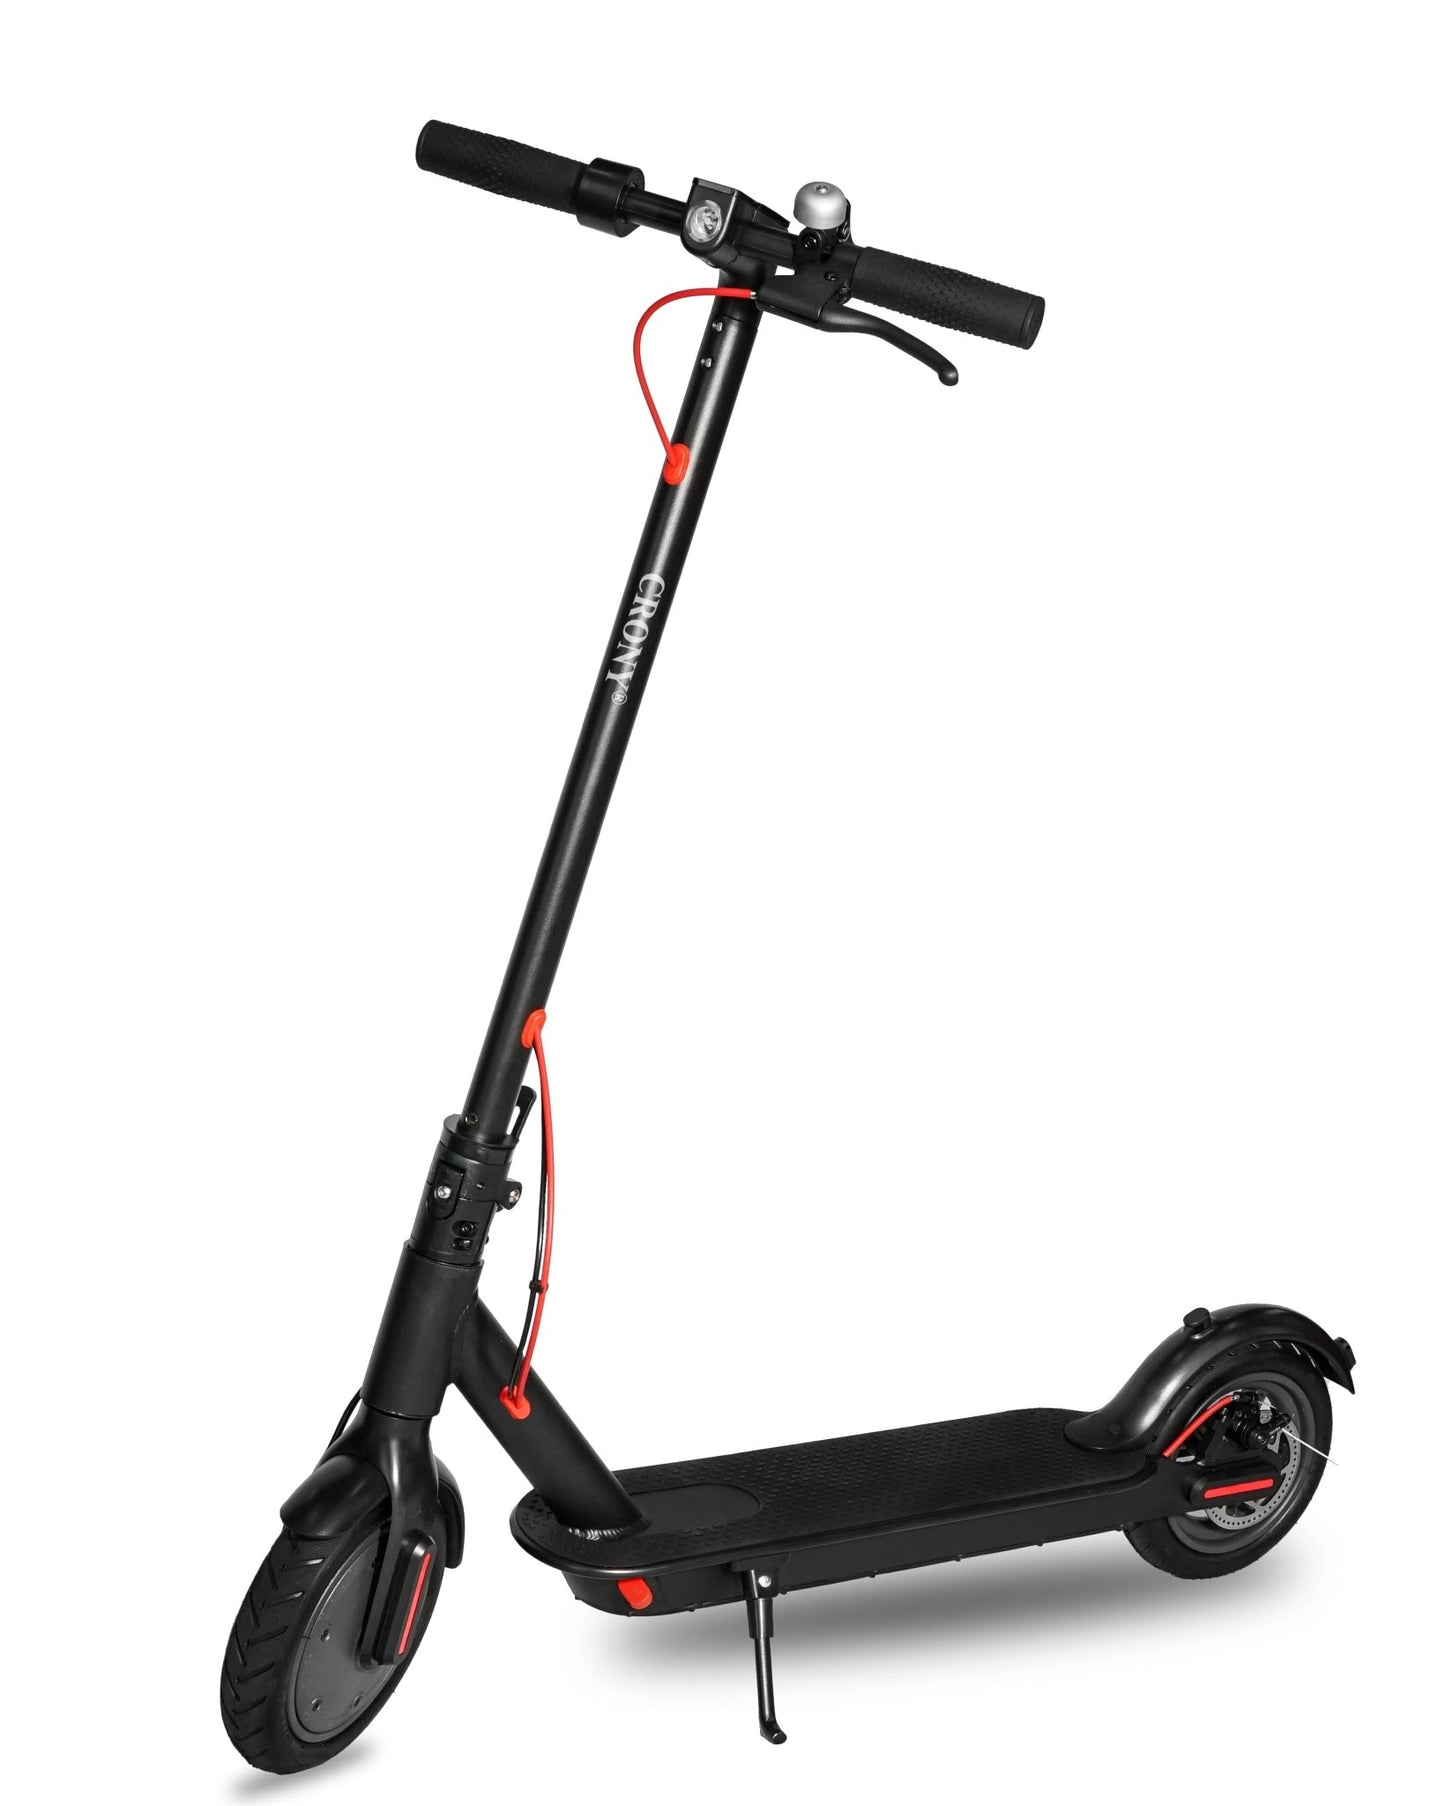 CRONY M365 scoote with APP-Jipu Electric Scooter Aluminium Alloy Folded 8.5 Inch tires | Dark grey - Edragonmall.com